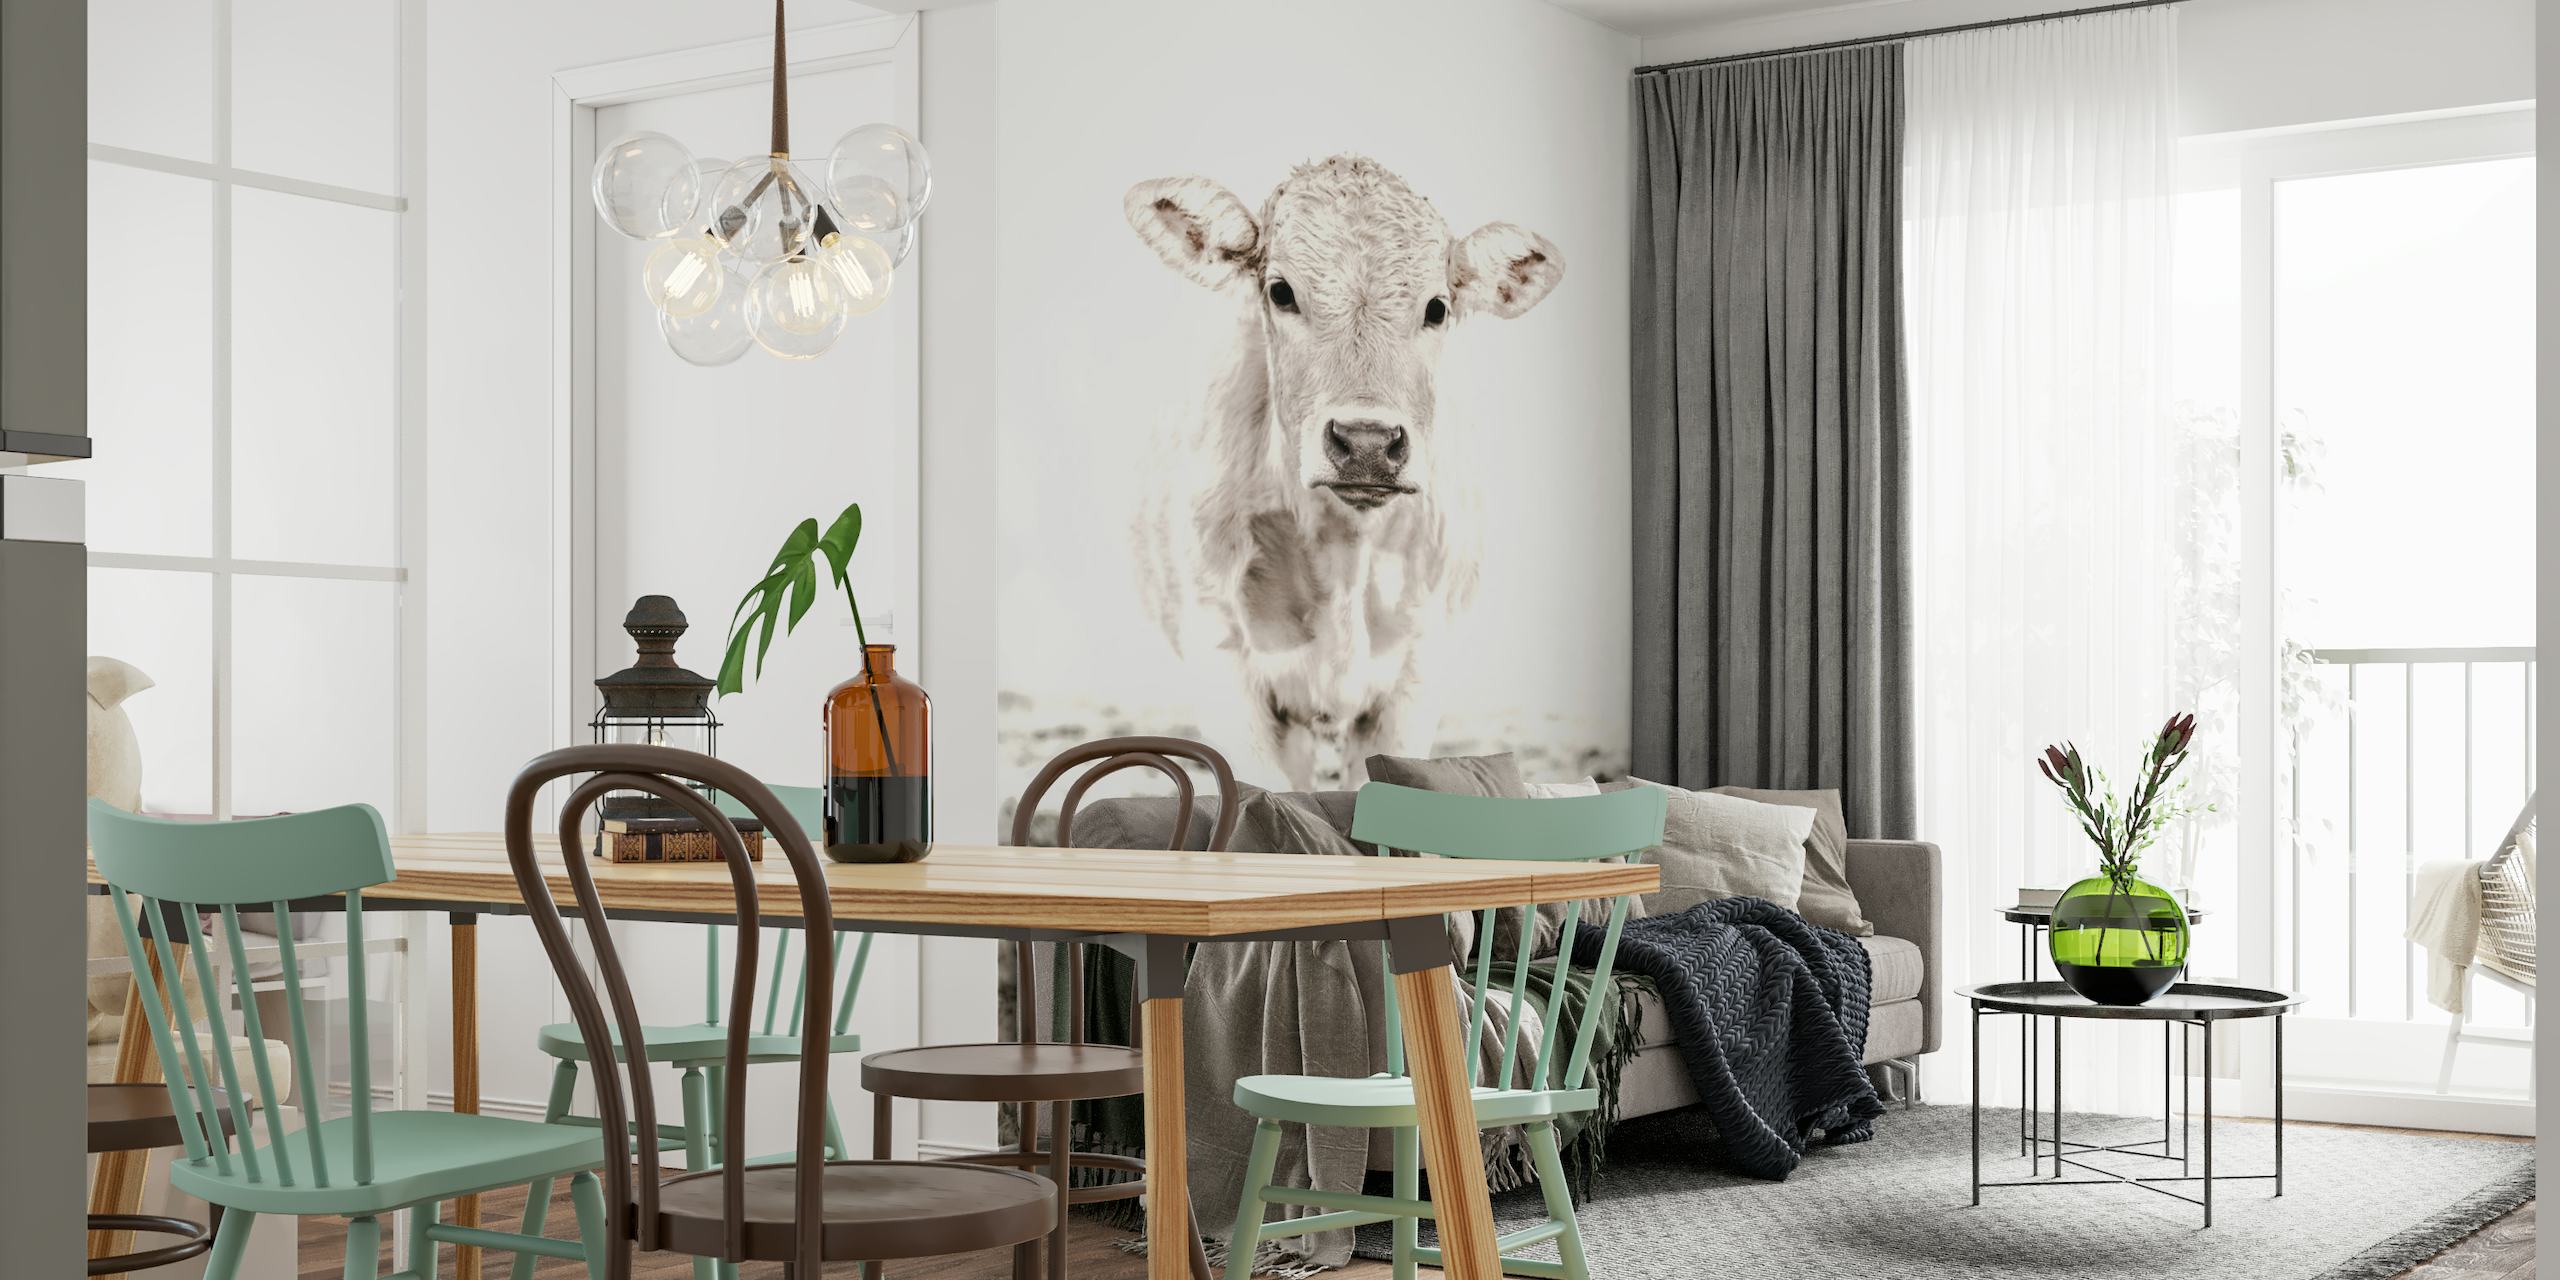 BLONDE CATTLE COTTAGELOVE BY MS wallpaper